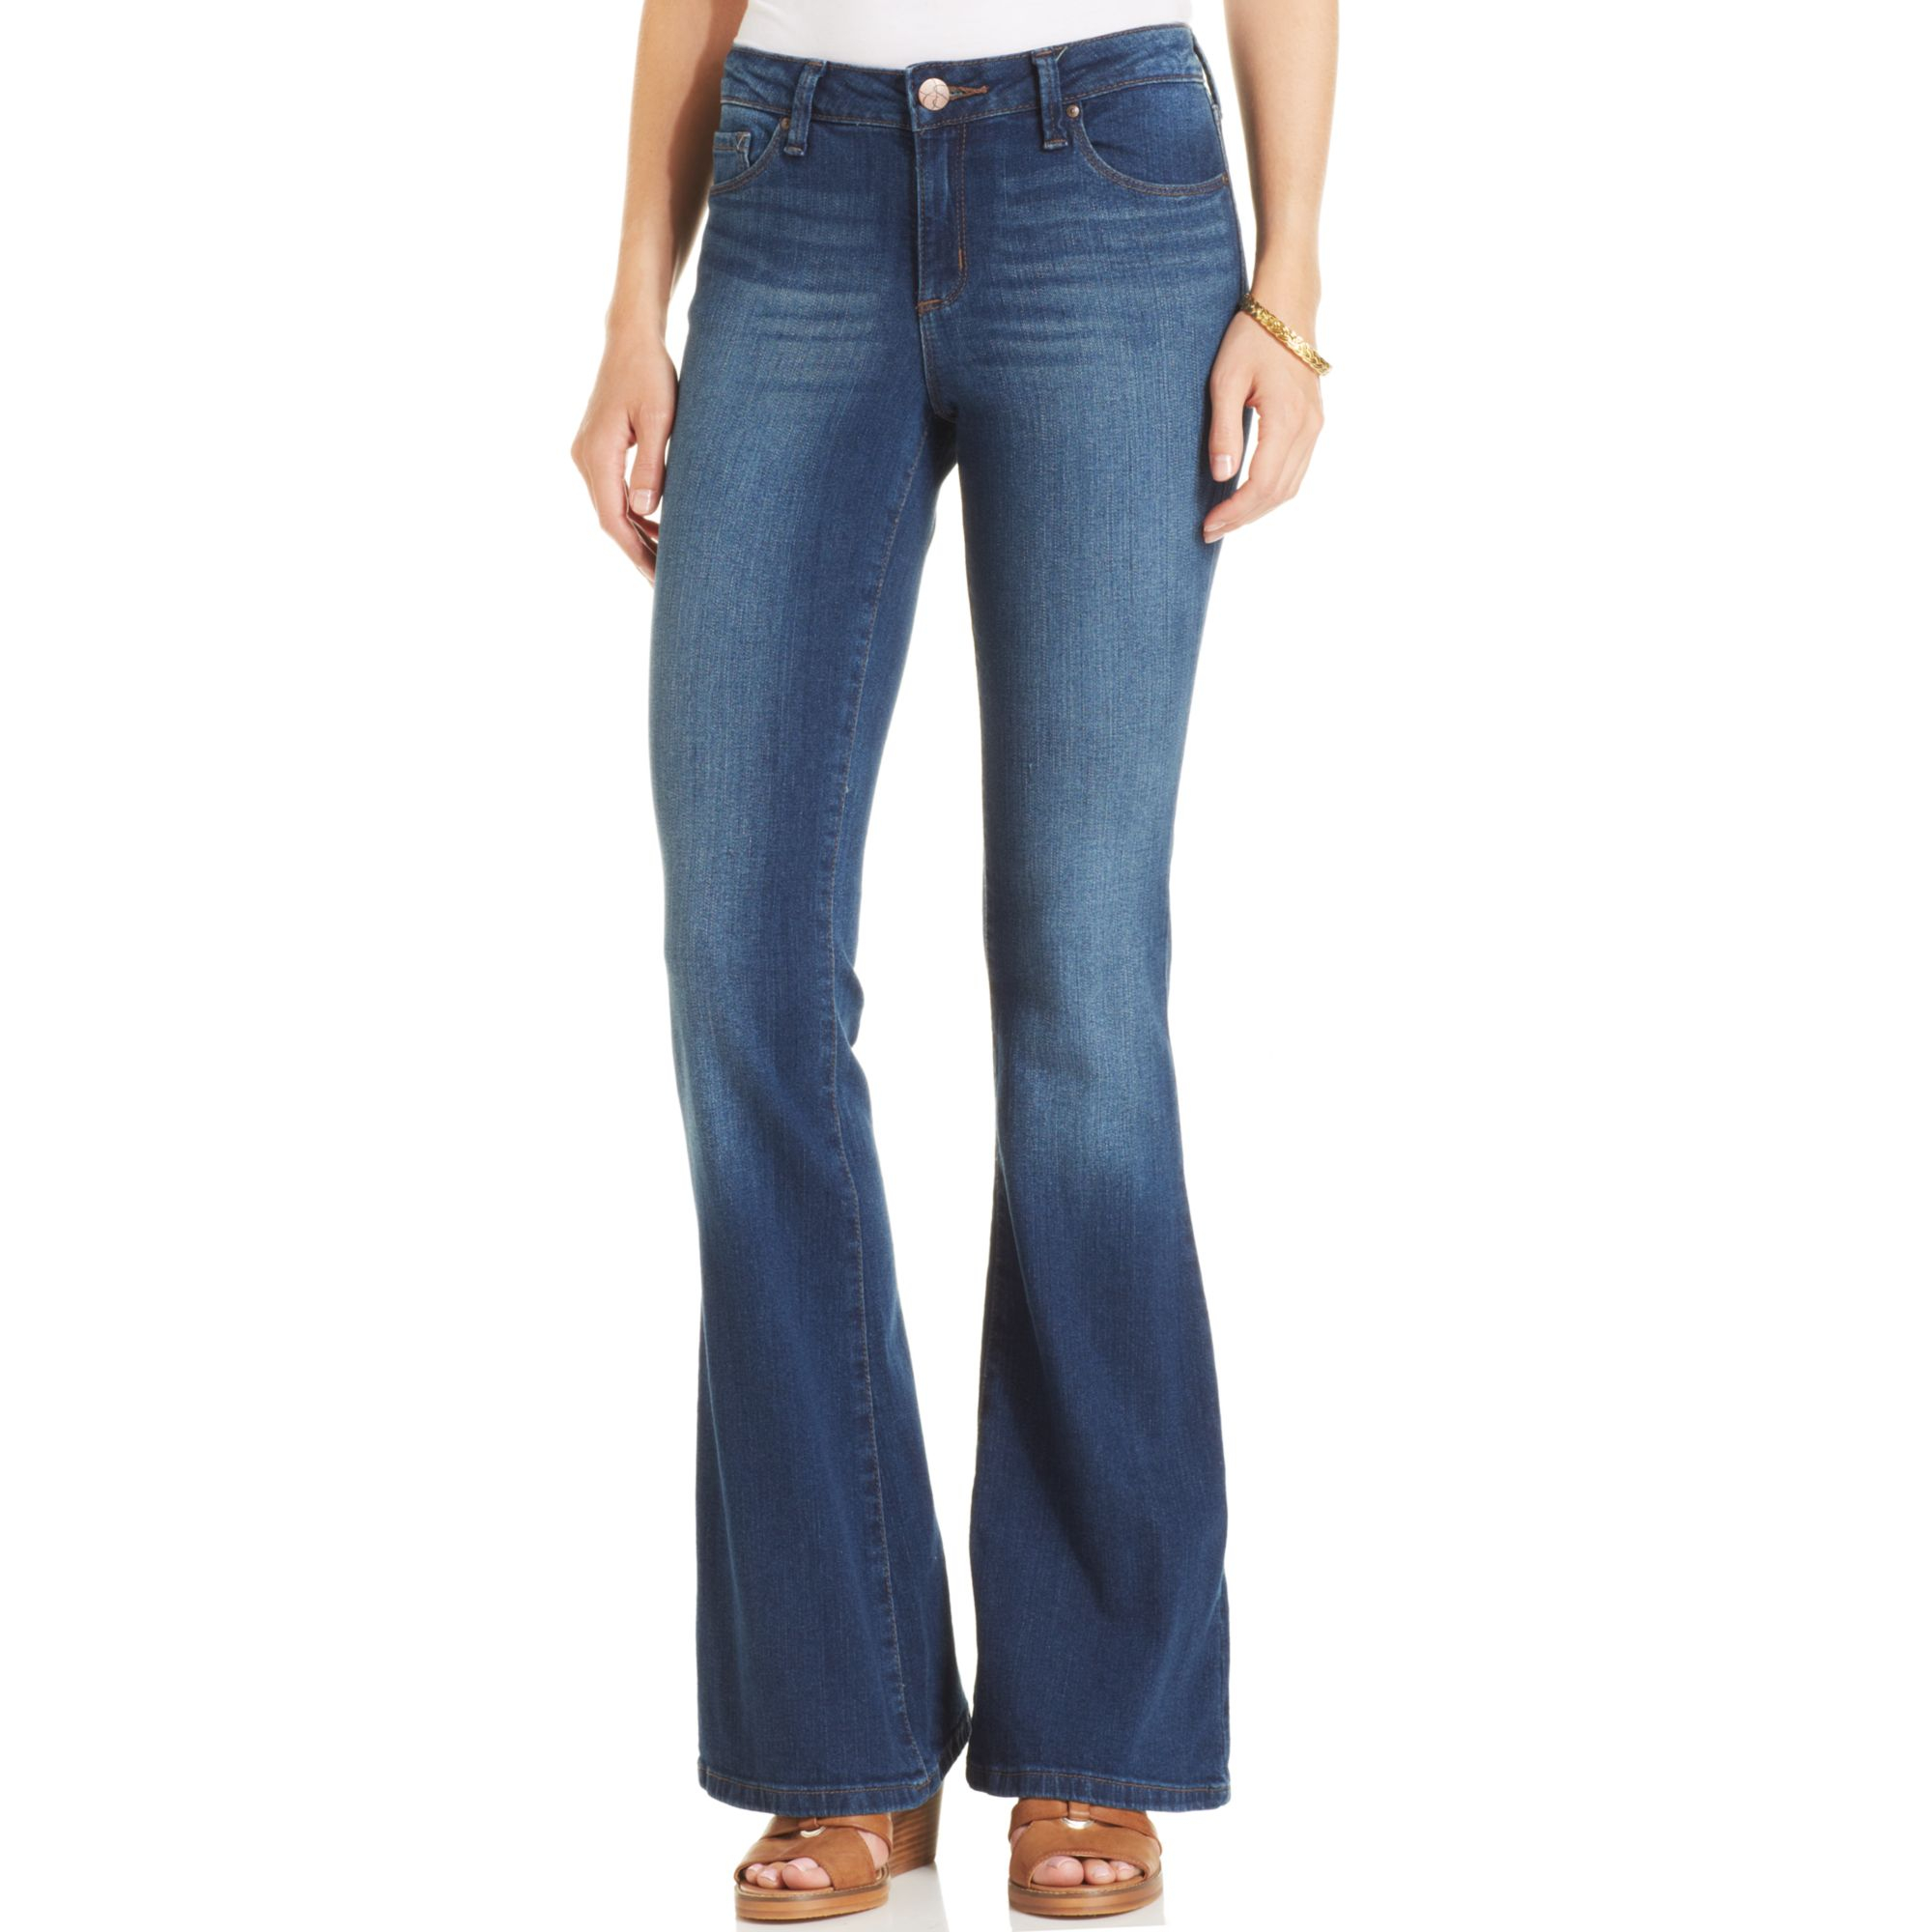 Lyst - Jessica Simpson Dreamer Flared Jeans in Blue